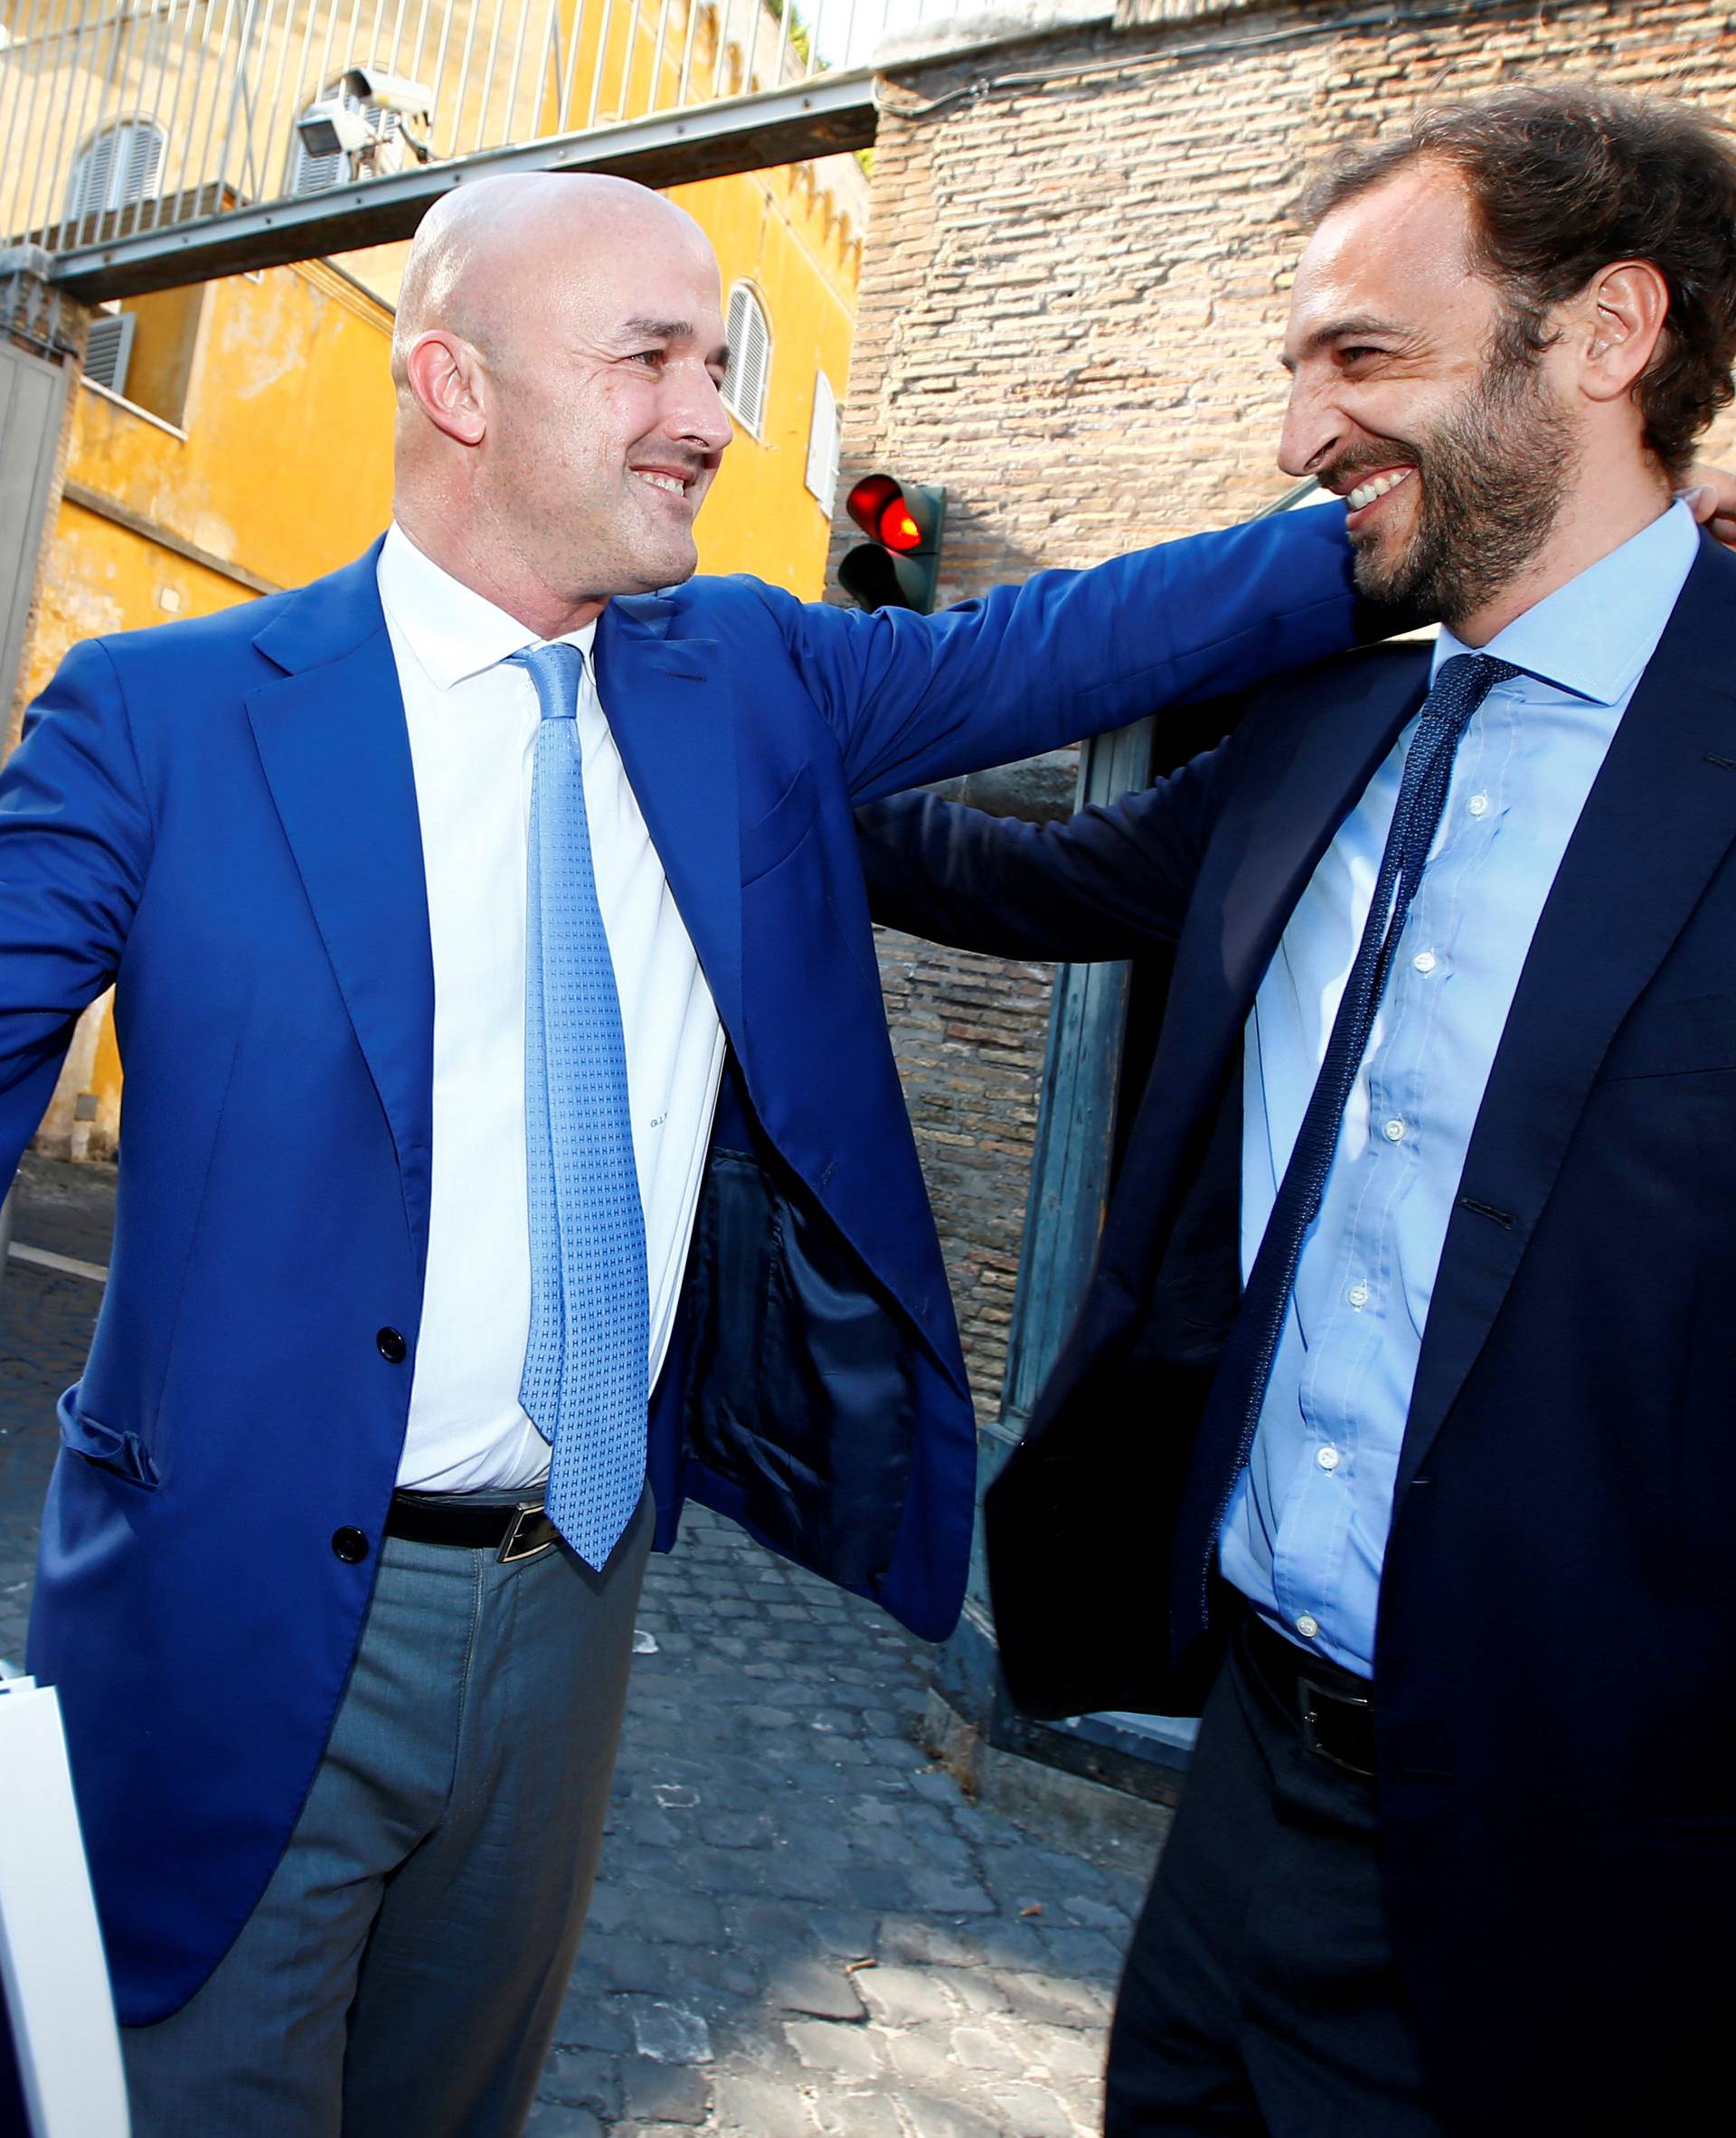 Journalists Fittipaldi and Nuzzi smile as they leave the Vatican at the end of their trial